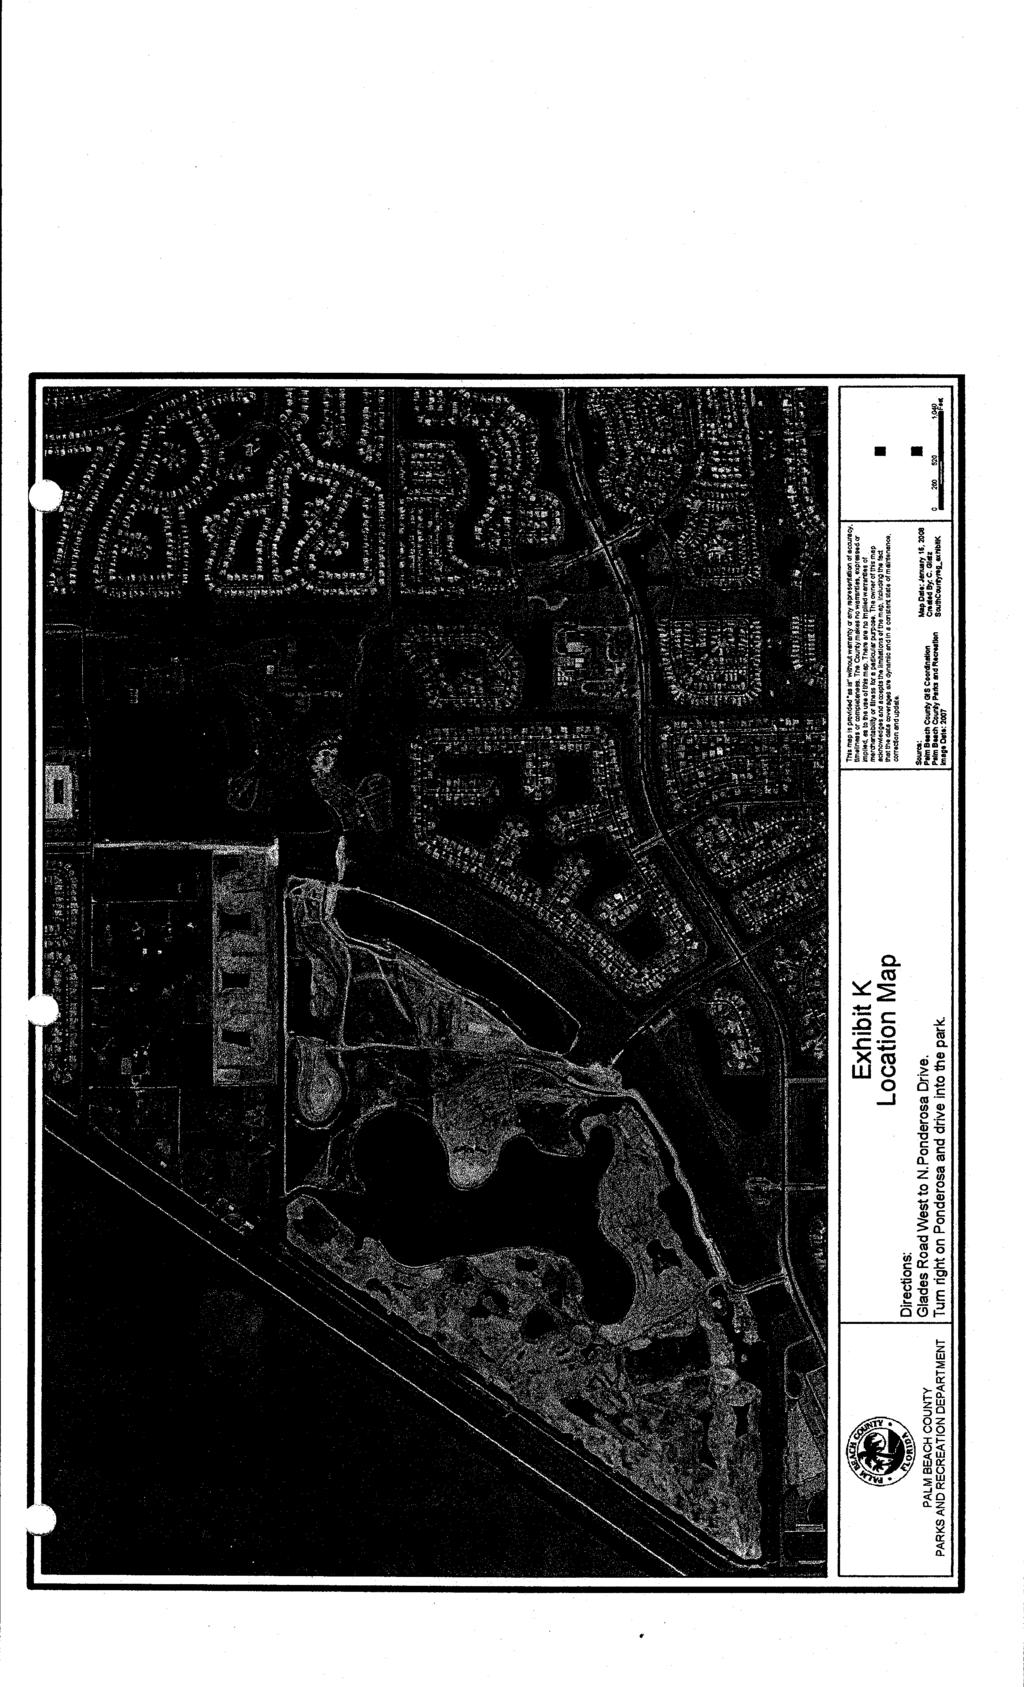 PALM BEACH COUNTY PARKS AND RECREATION DEPARTMENT Exhibit K Location Map Directions: Glades Road West to N.Ponderosa Drive. Tum right on Ponderosa and drive into the park.